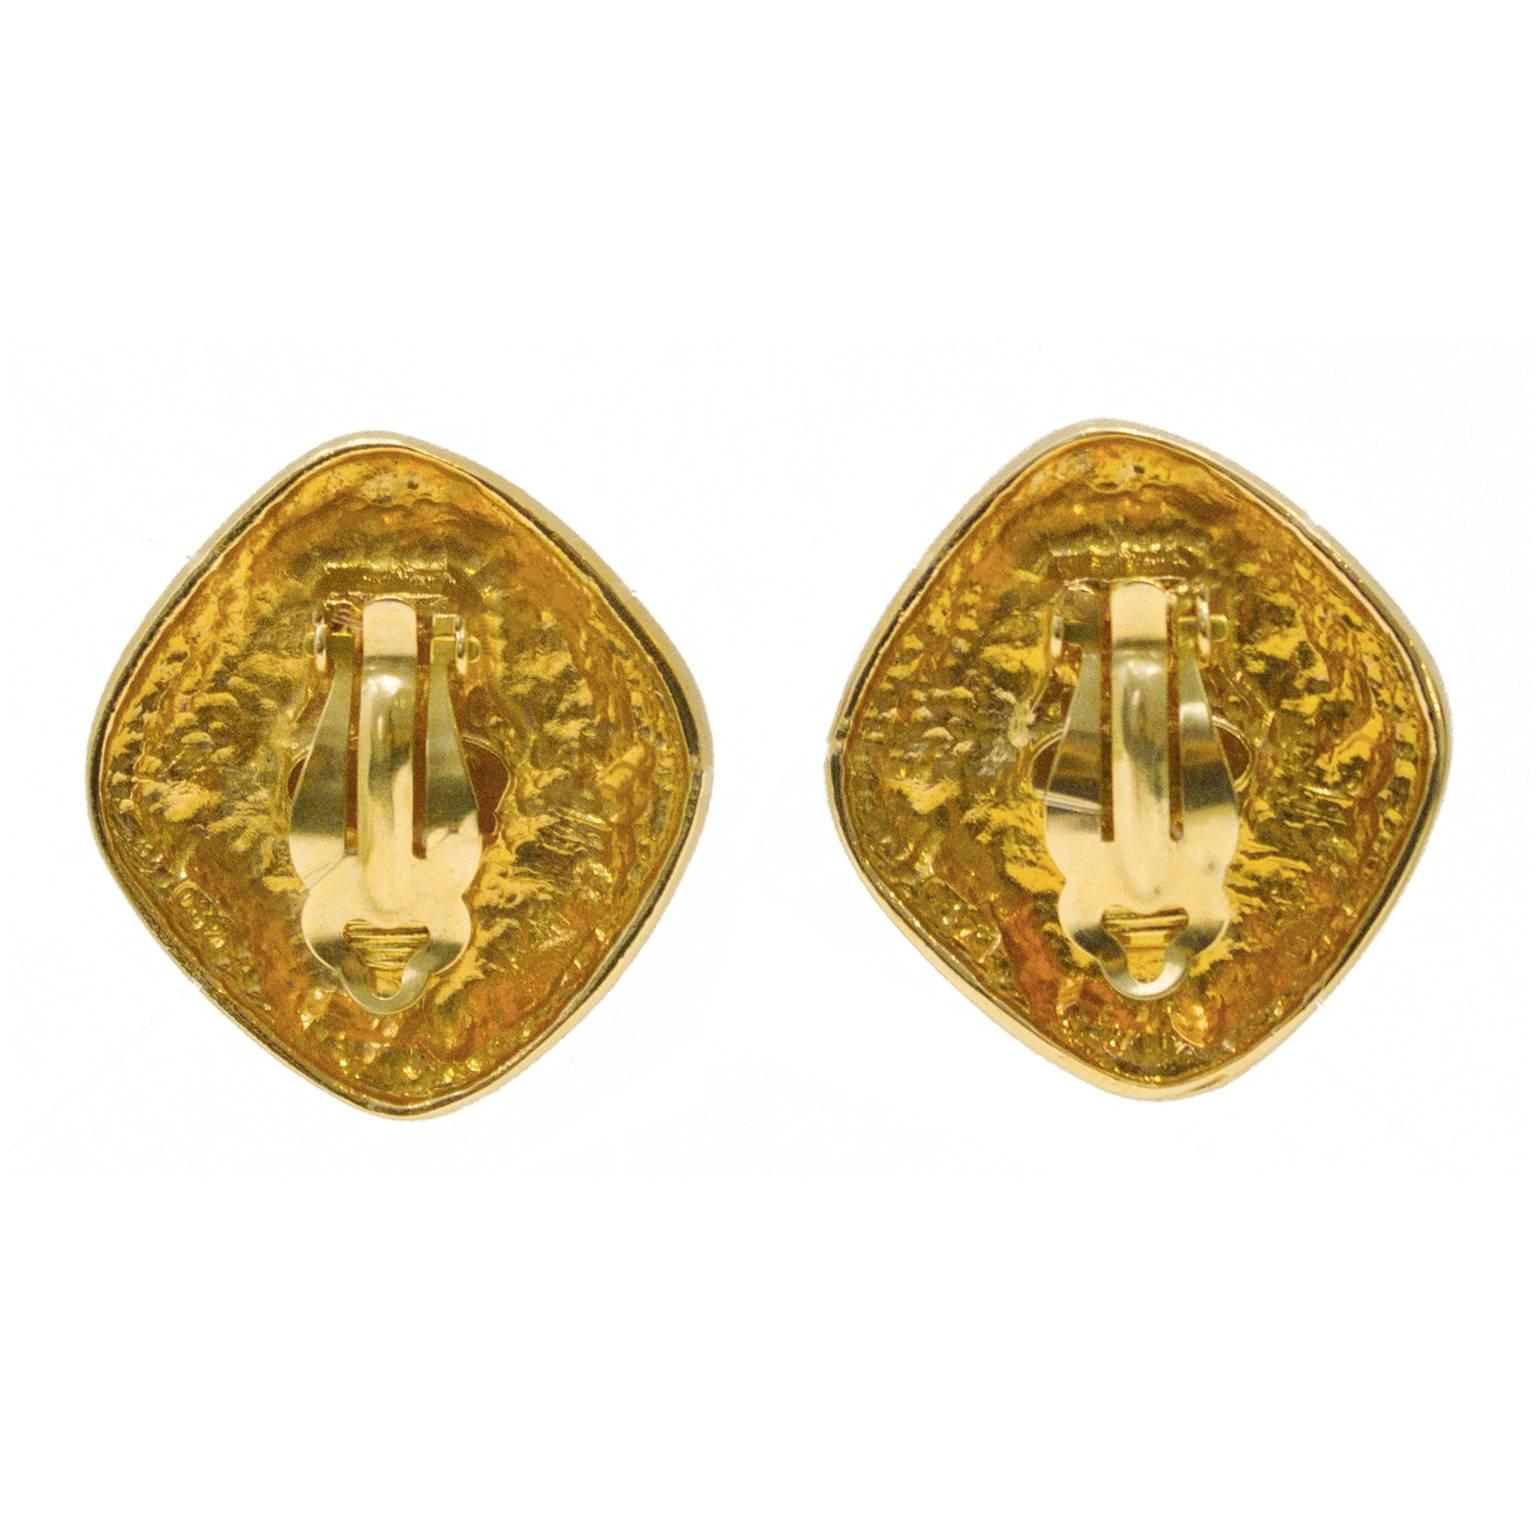 Early 80’s Chanel diamond shape clip-on earrings with center pearl. Textured gold tone surrounding decorated a ball and swirl pattern. Excellent condition.